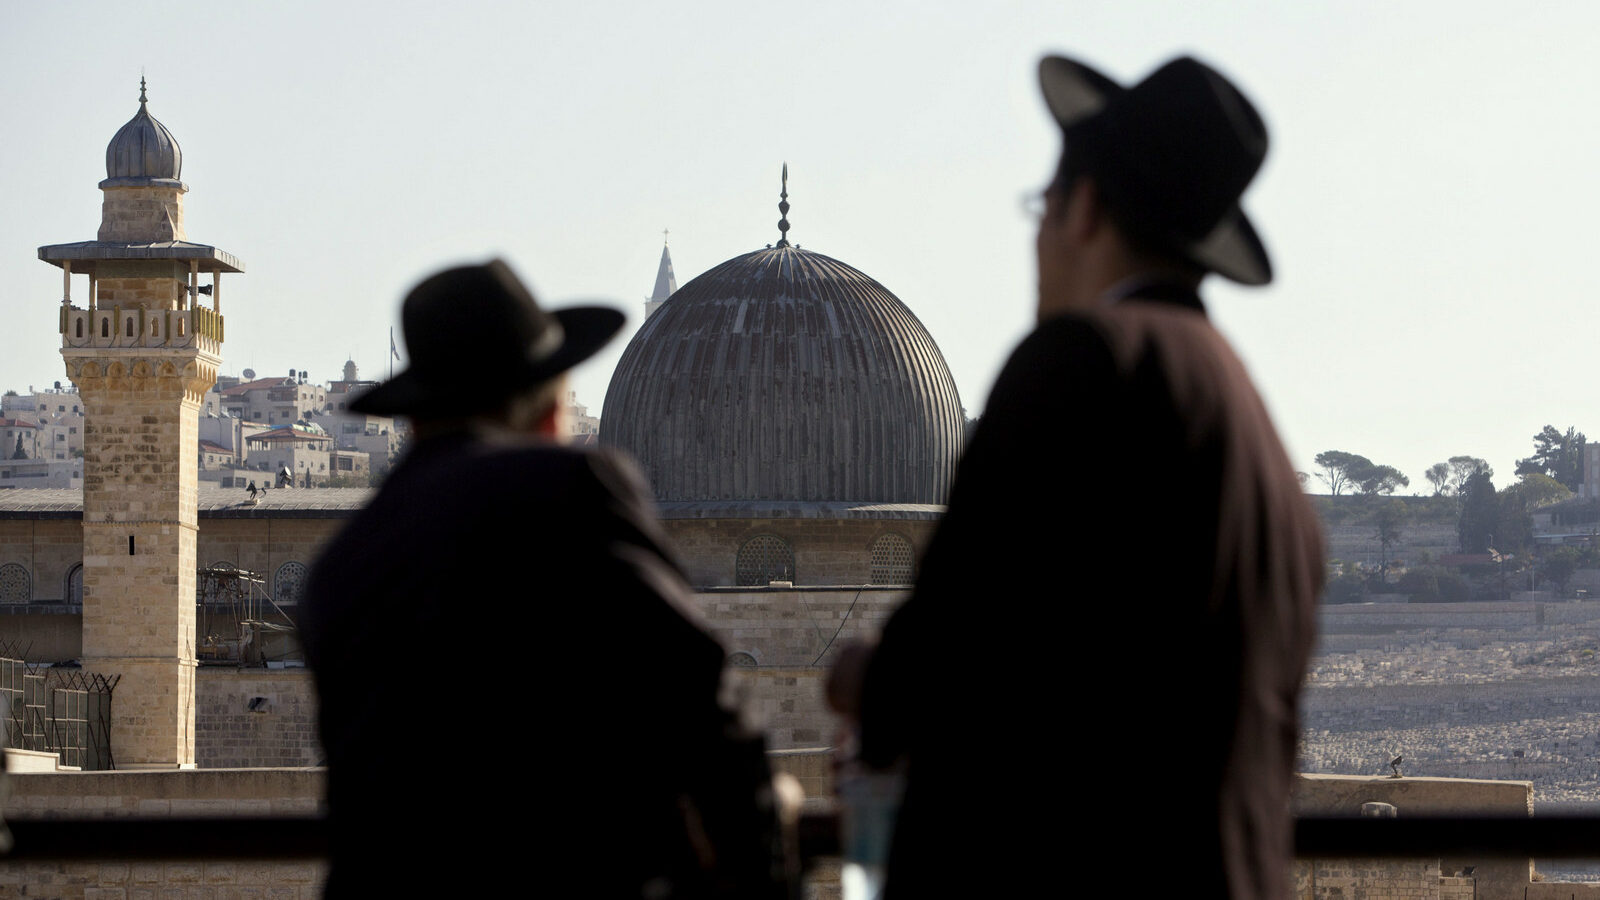 Ultra-Orthodox Jewish men stand in front of the Al-Aqsa Mosque in Jerusalem's Old City. Israeli police are reporting new unrest at Jerusalem's most sensitive holy site Sunday, Sept. 27, 2015. The site, known as the Temple Mount to Jews and the Noble Sanctuary to Muslims, had experienced several days of unrest in recent weeks. (AP Photo/Sebastian Scheiner, File)